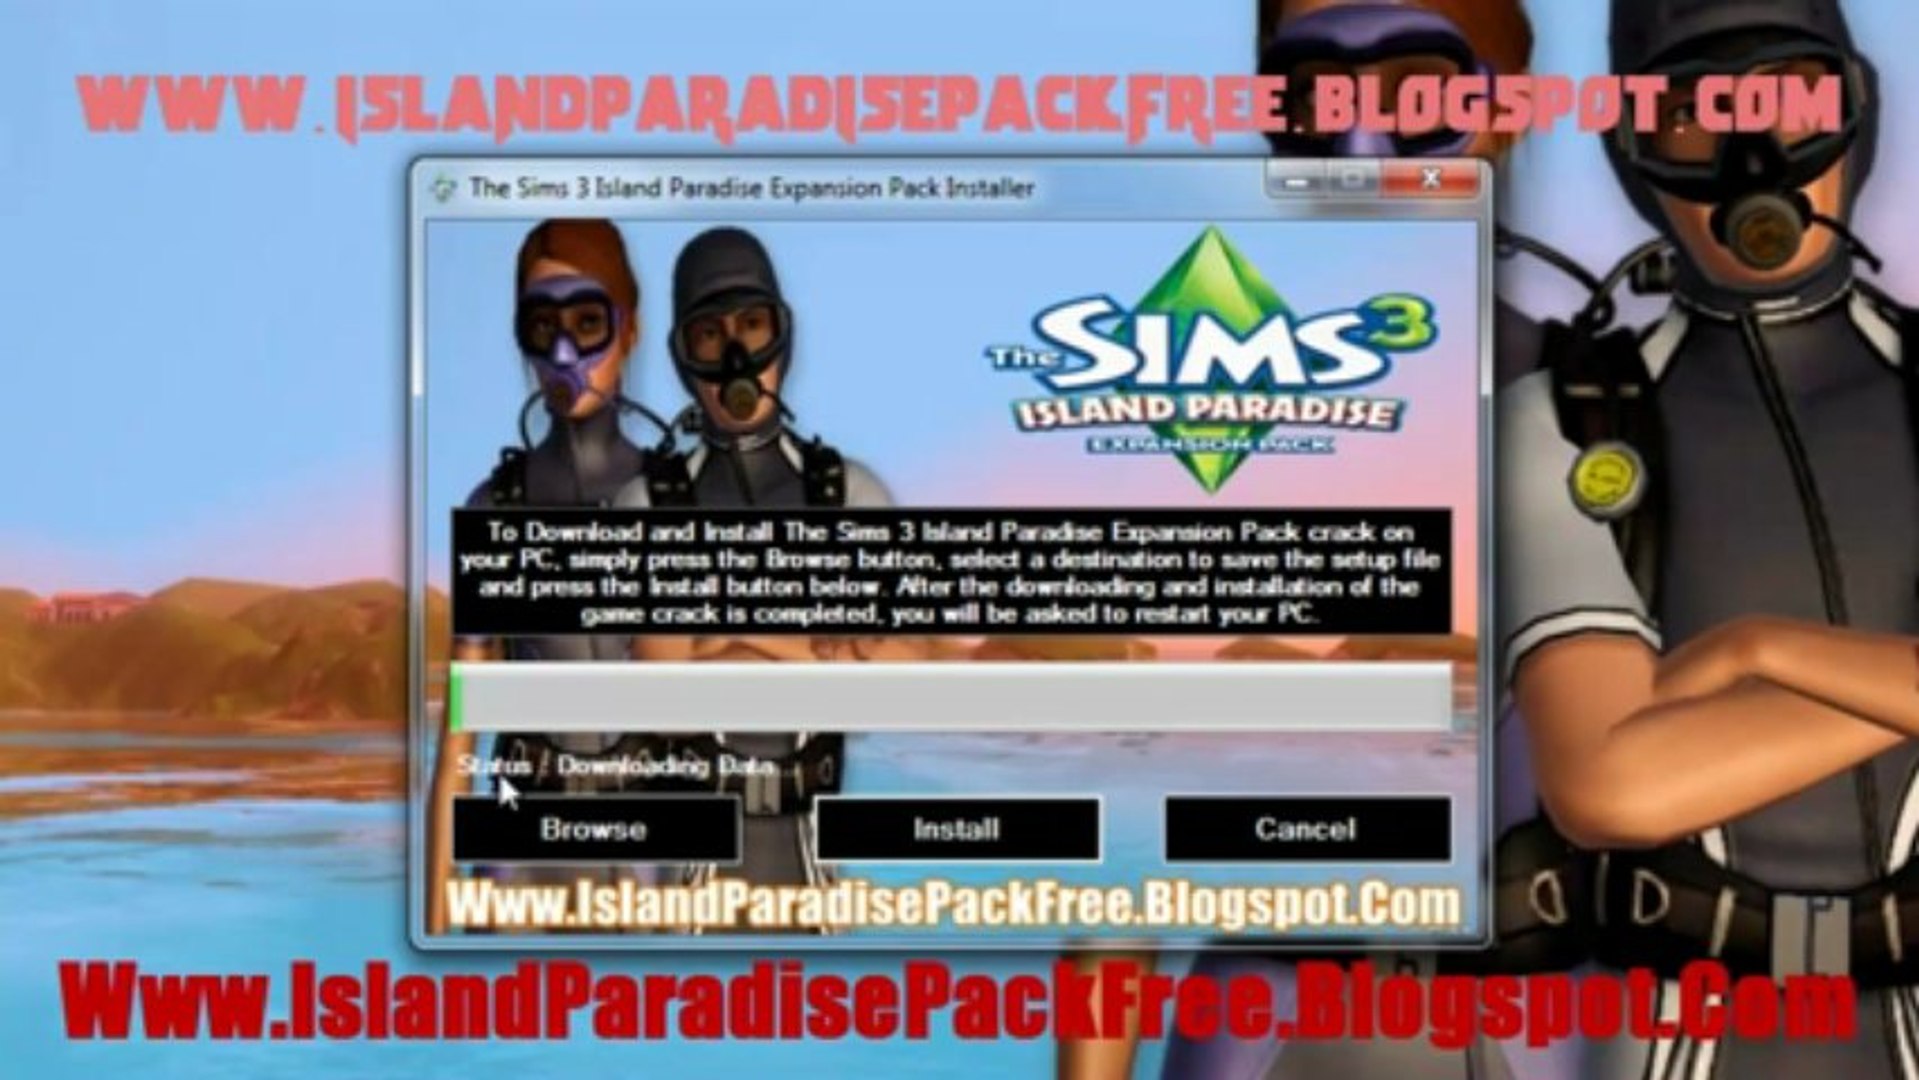 Get The Sims 3 Island Paradise Expansion Pack For Free On PC - video  Dailymotion